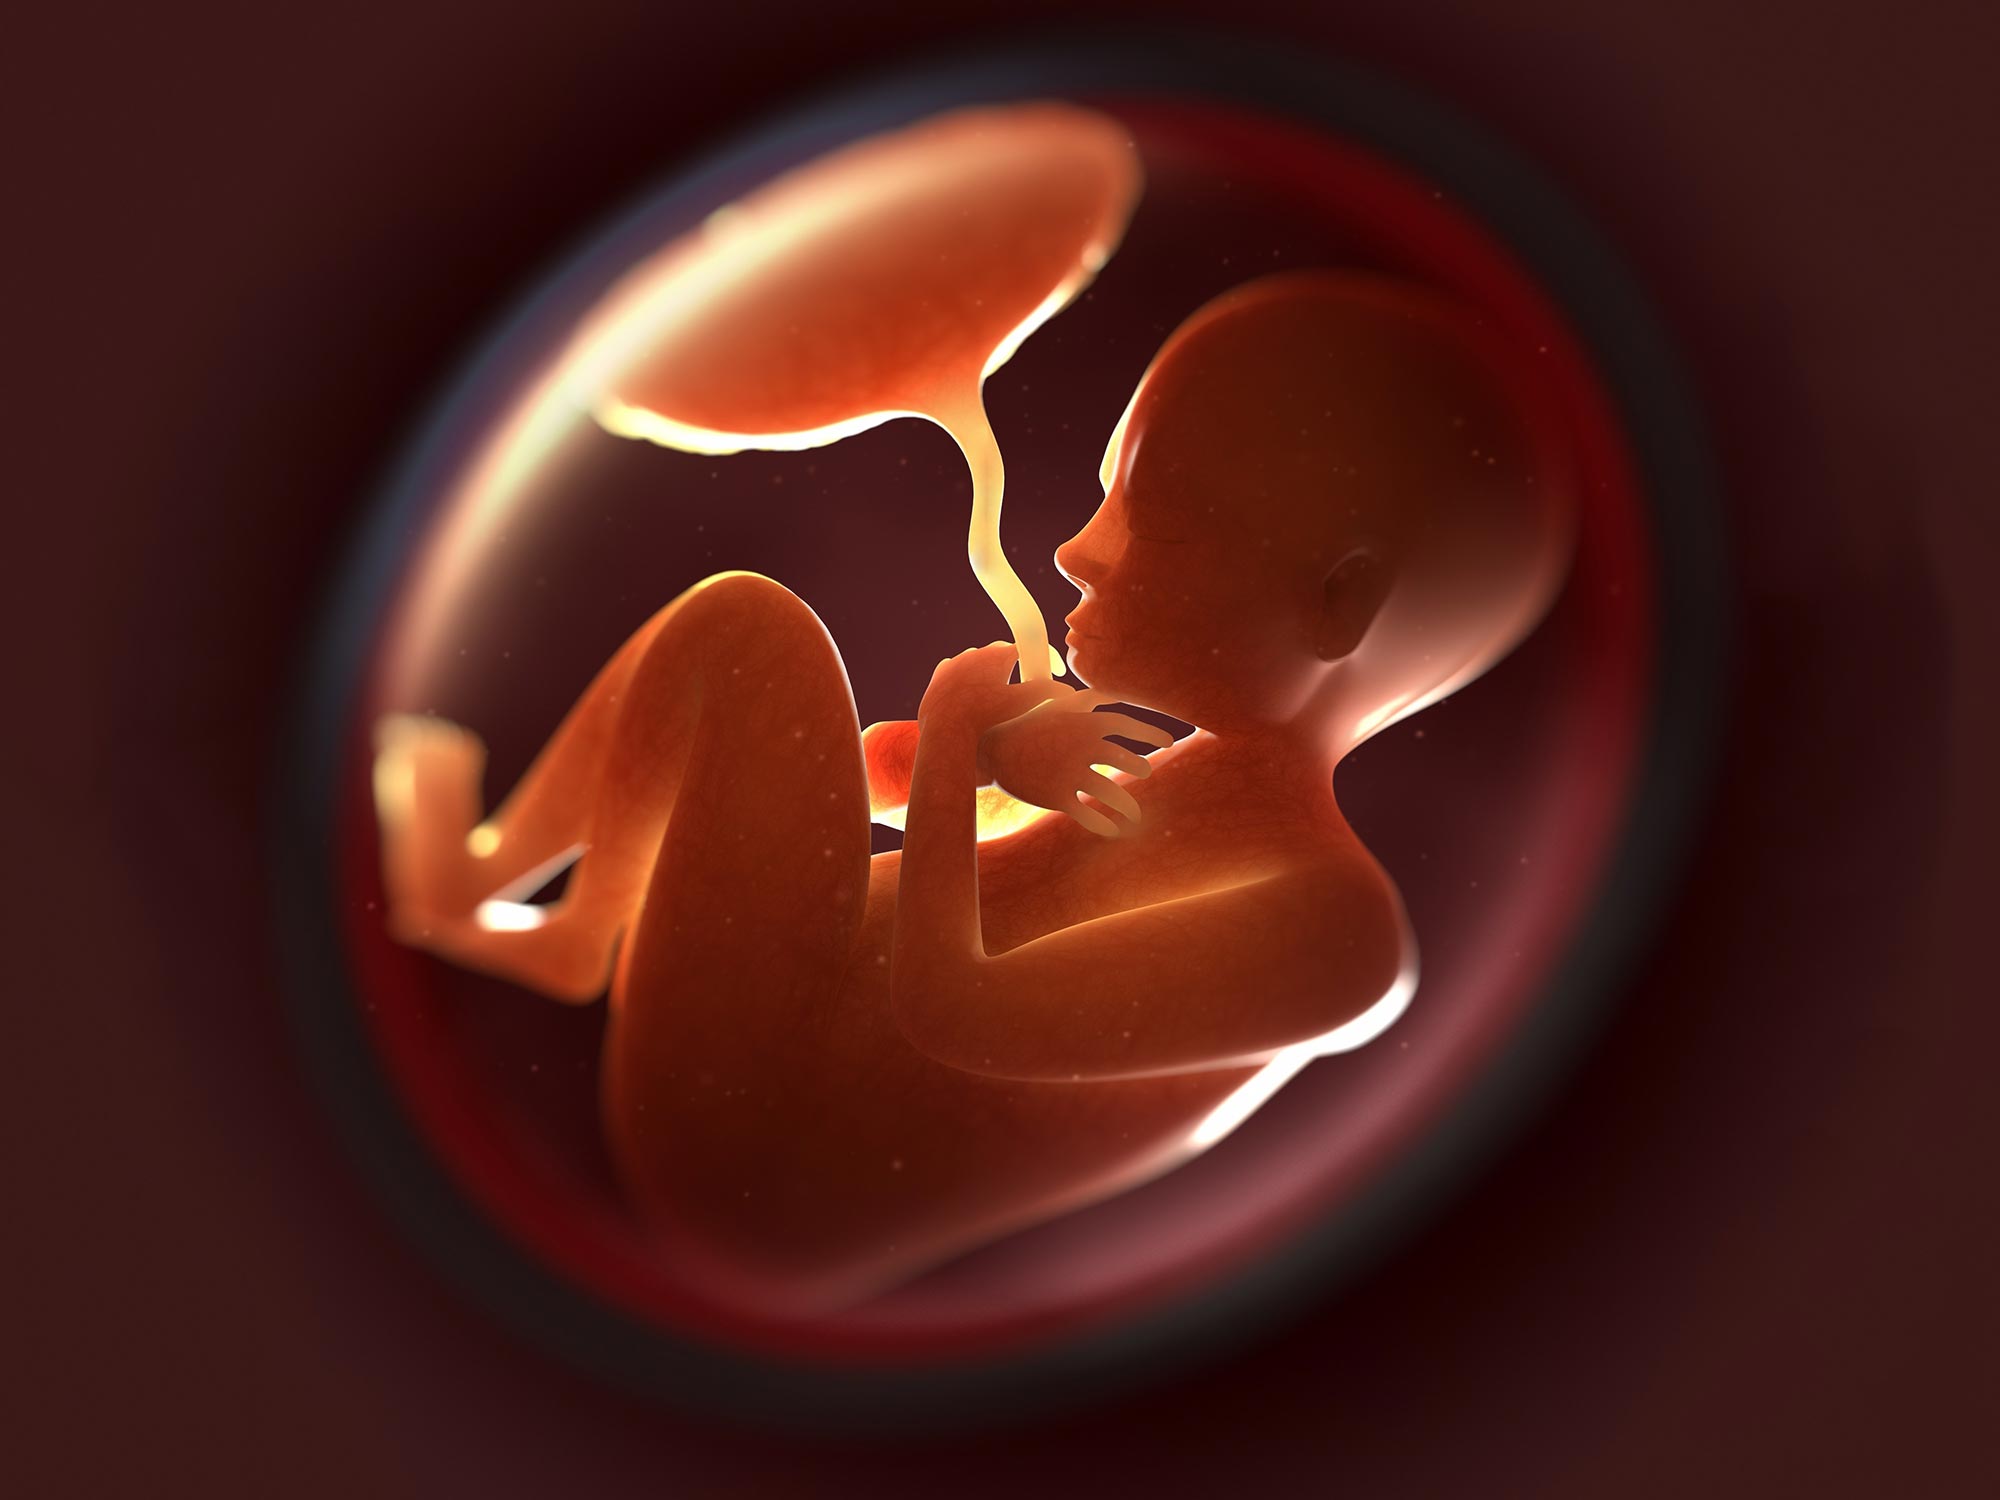 Genome Analysis Now Allows Scientists To Predict if You Will Have a Miscarriage - SciTechDaily